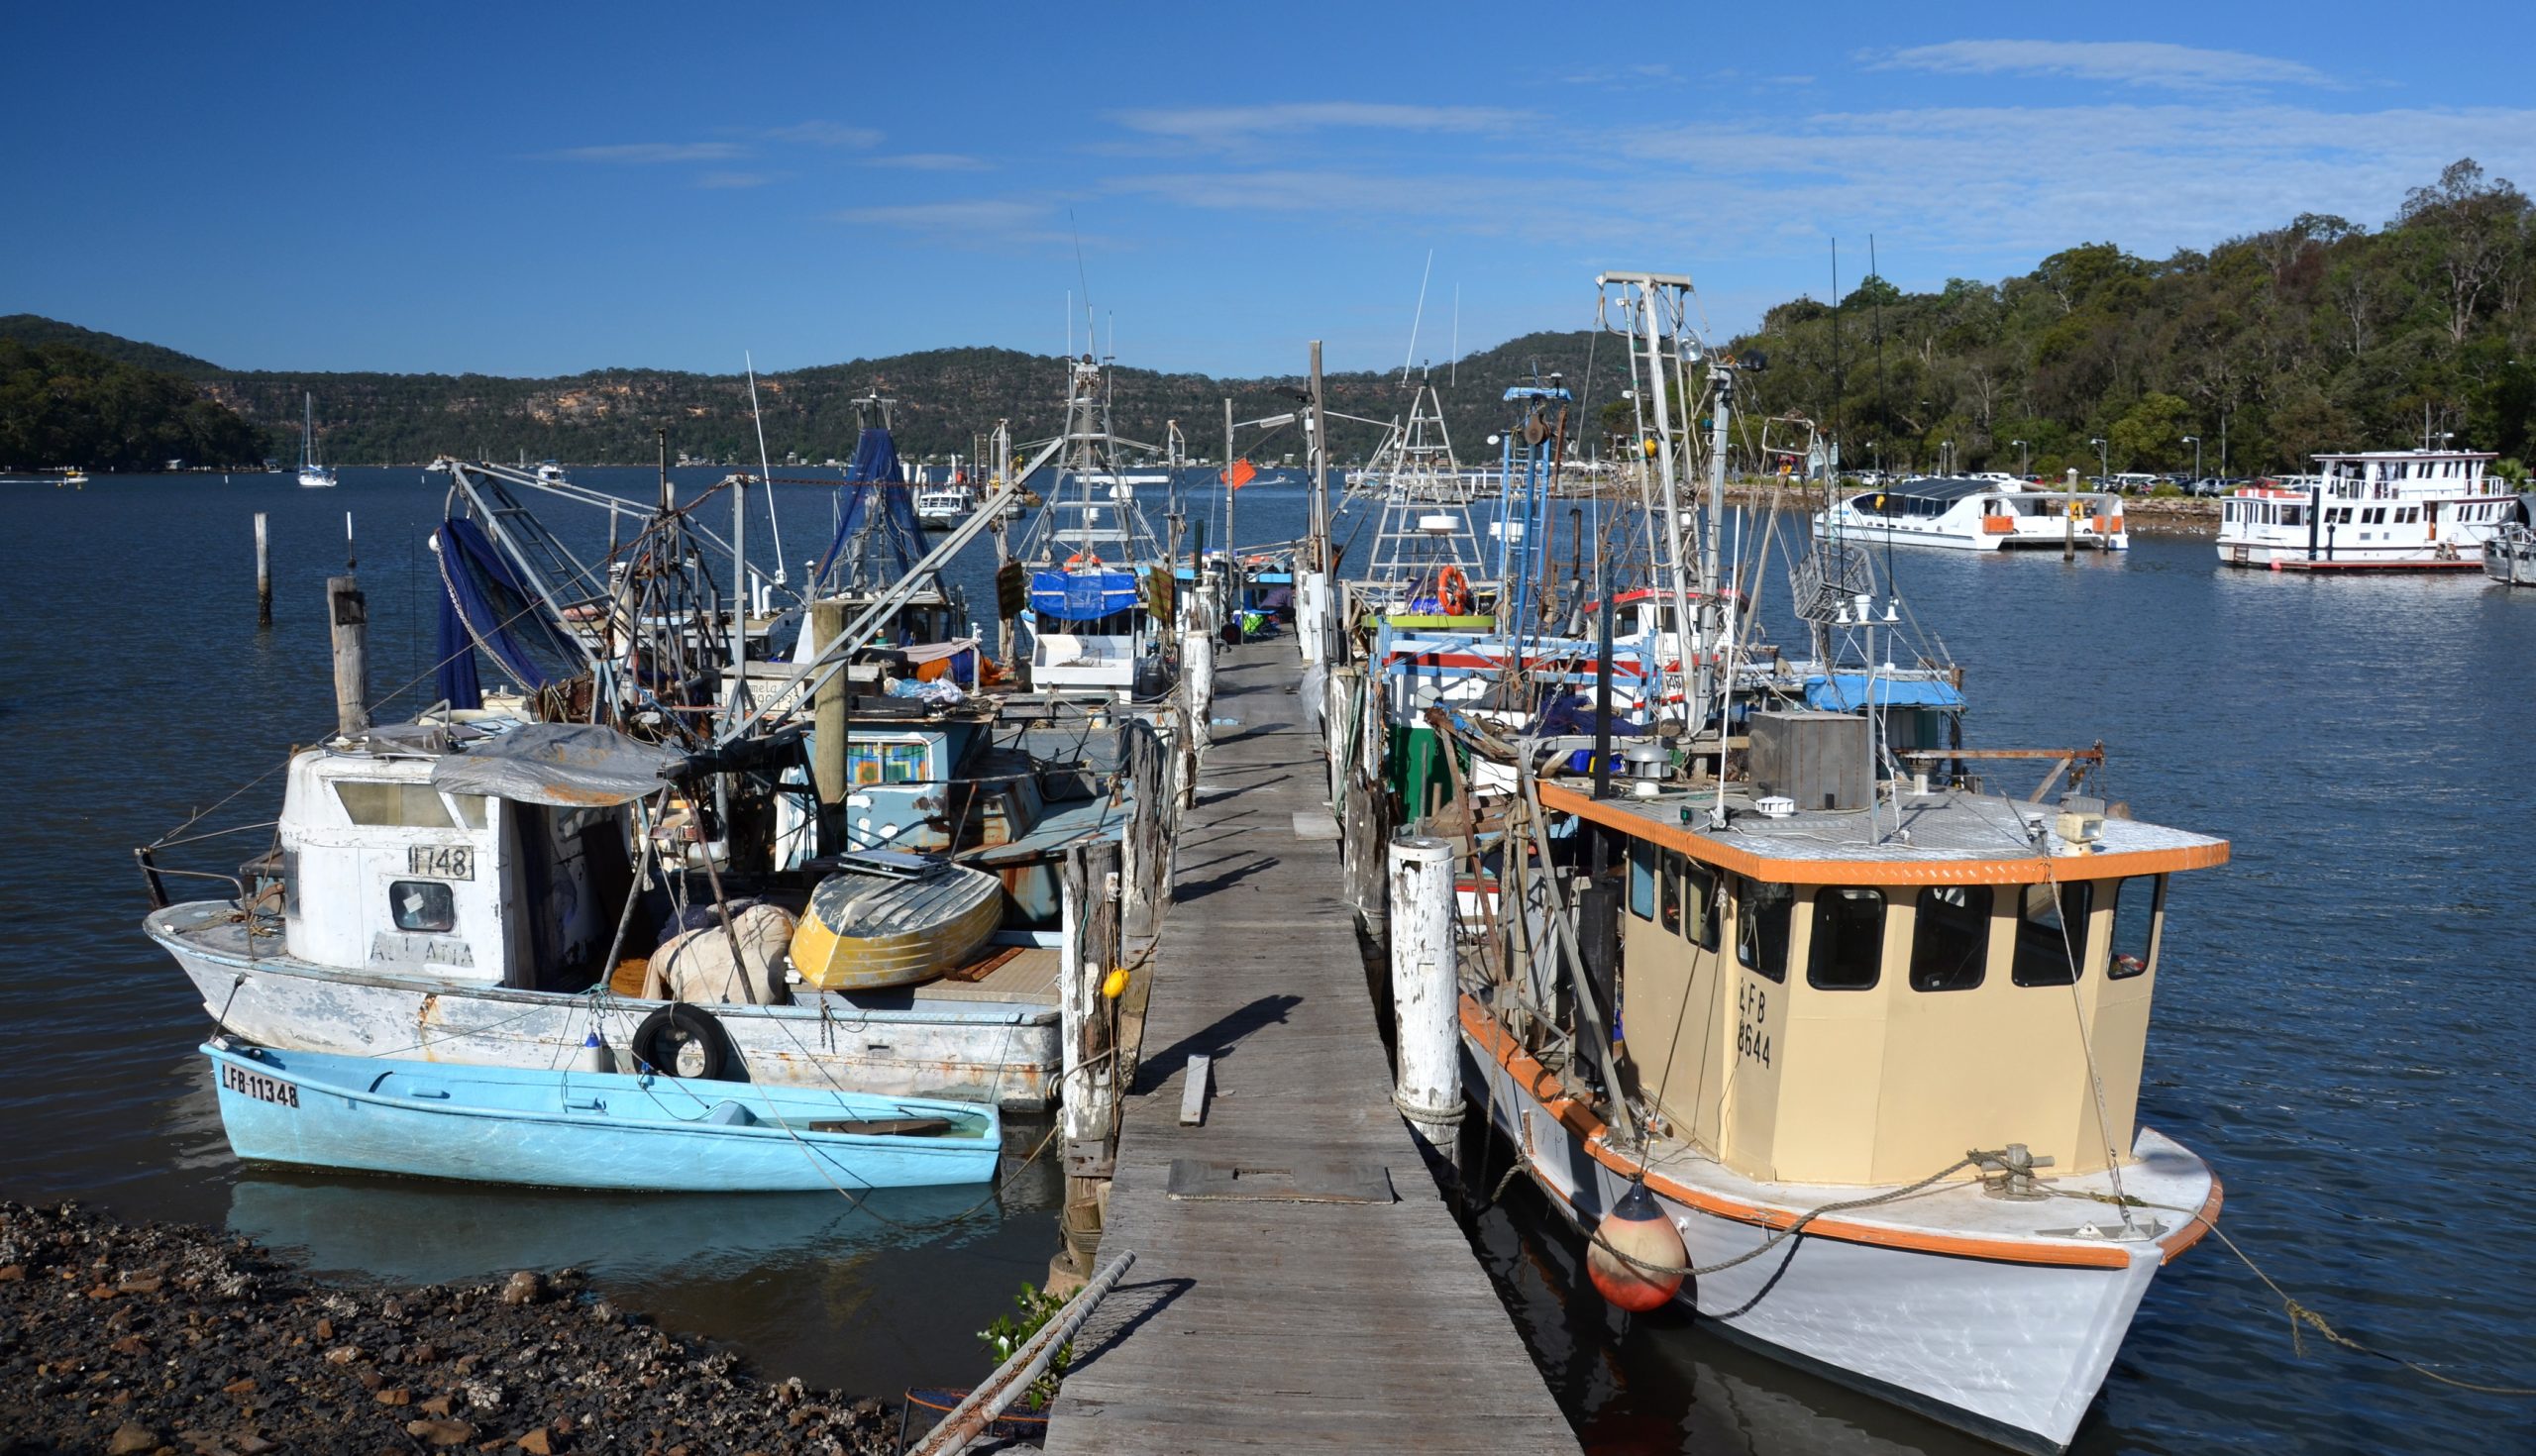 Old dingy Fisher boats at the marina at Hawkesbury River in Brooklyn (NSW, Australia) on a sunny day.